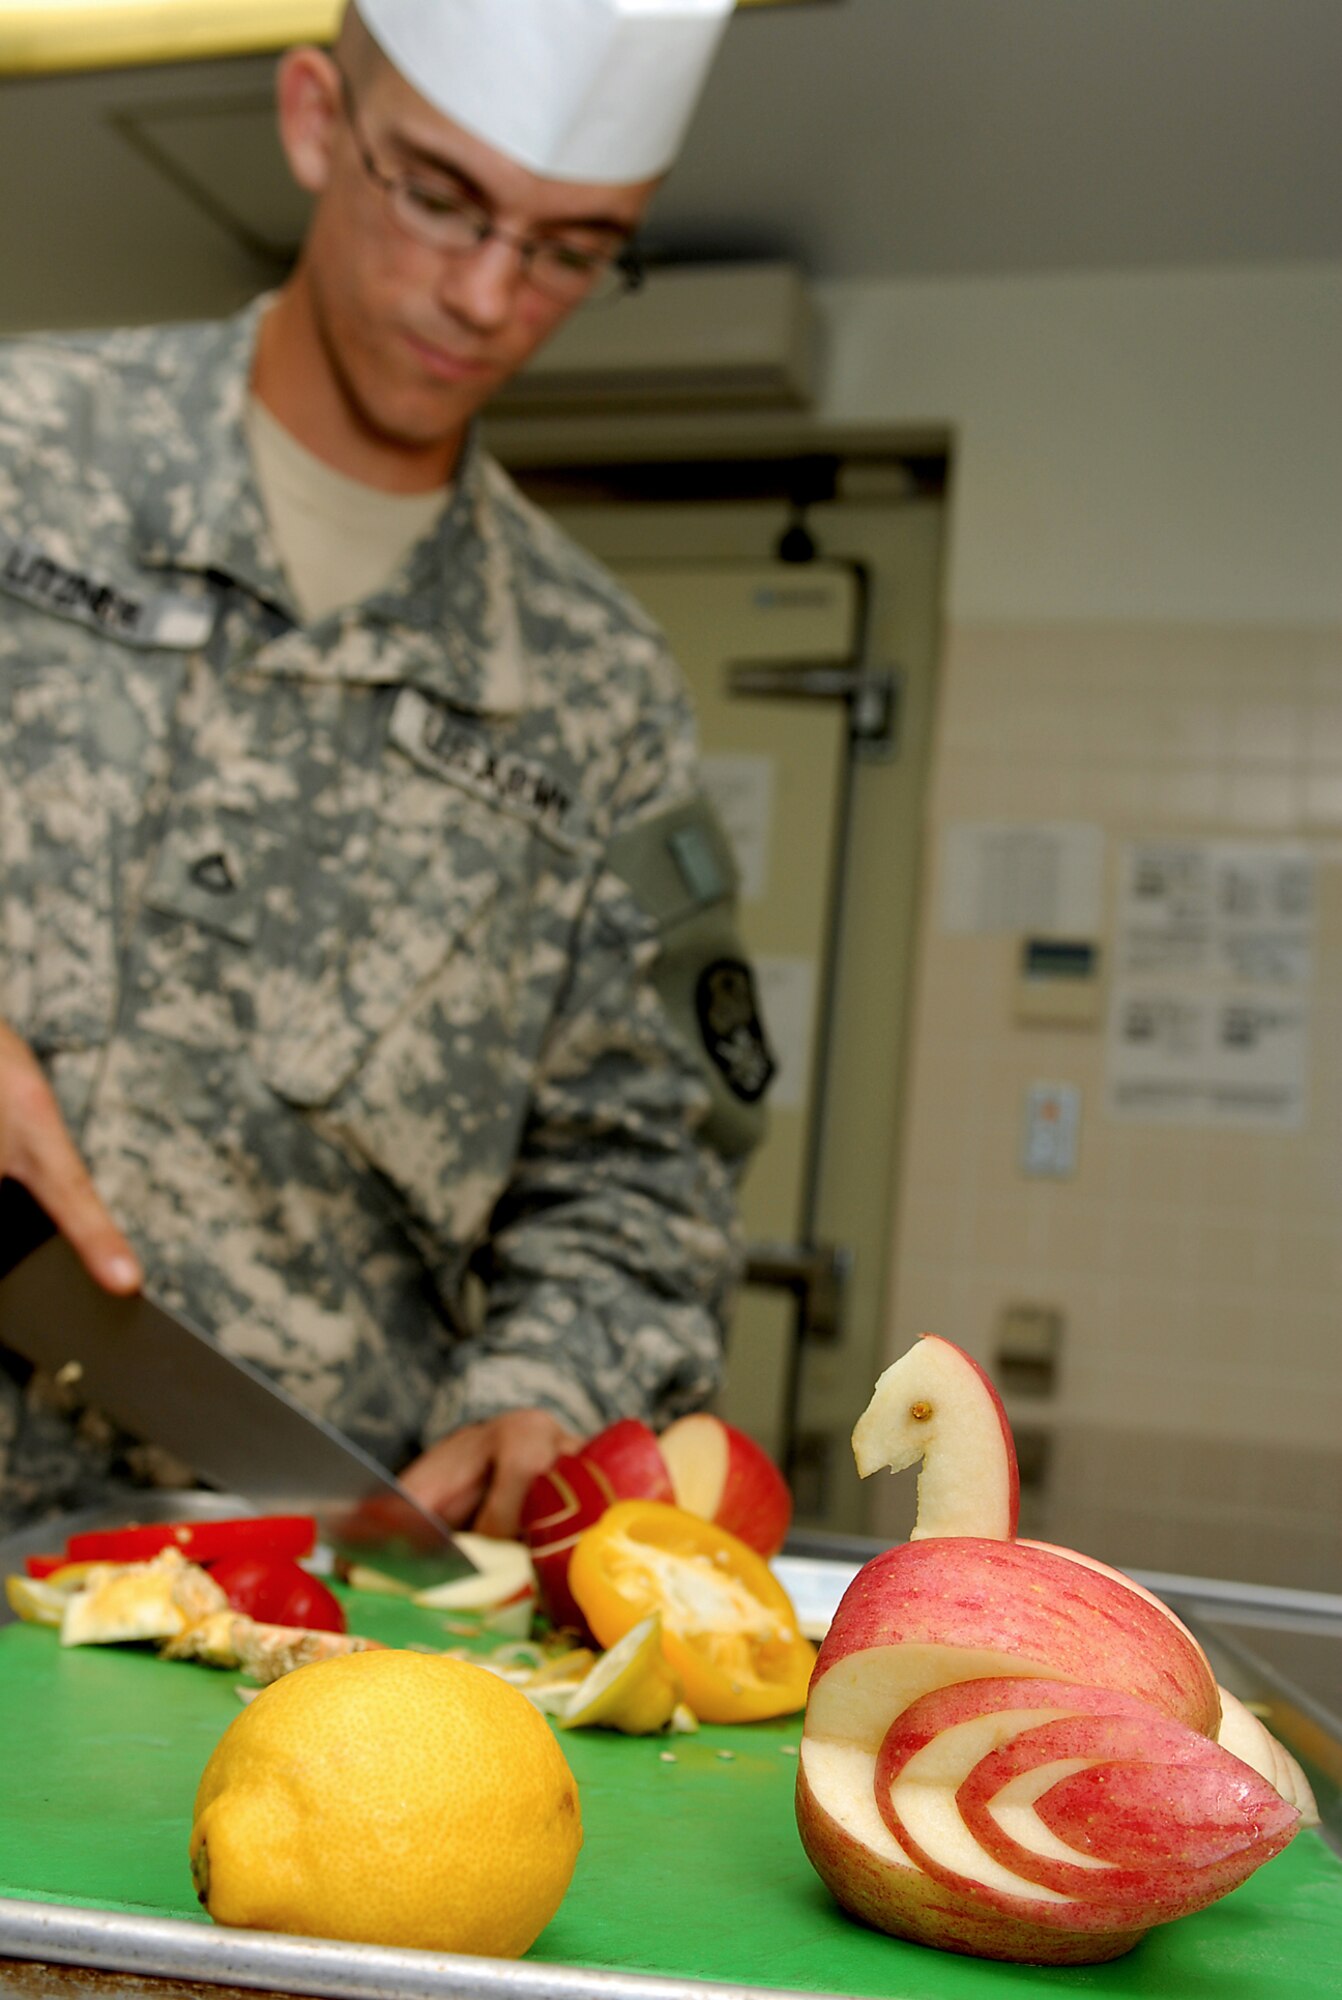 Army Private 1st Class Christopher Litzner skillfully carves a swan from an apple to be used as a decoration for the food lines of  Marshall Dining Facility at Kadena Air Base, Japan, Aug. 15, 2007.  Making garnishes help the cooks maintain their showmanship and turns the feel of the dining facility into that of a nice restaurant.  The Marshall Dining Facility serves three meals to more than 1,000 U.S. military military members daily.  Private Litzner is from the 1-1 Air Defense Artillery Battalion and works side-by-side with 18th Services Squadron Airmen.  
(U.S. Air Force photo/Airman 1st Class Kelly Timney)